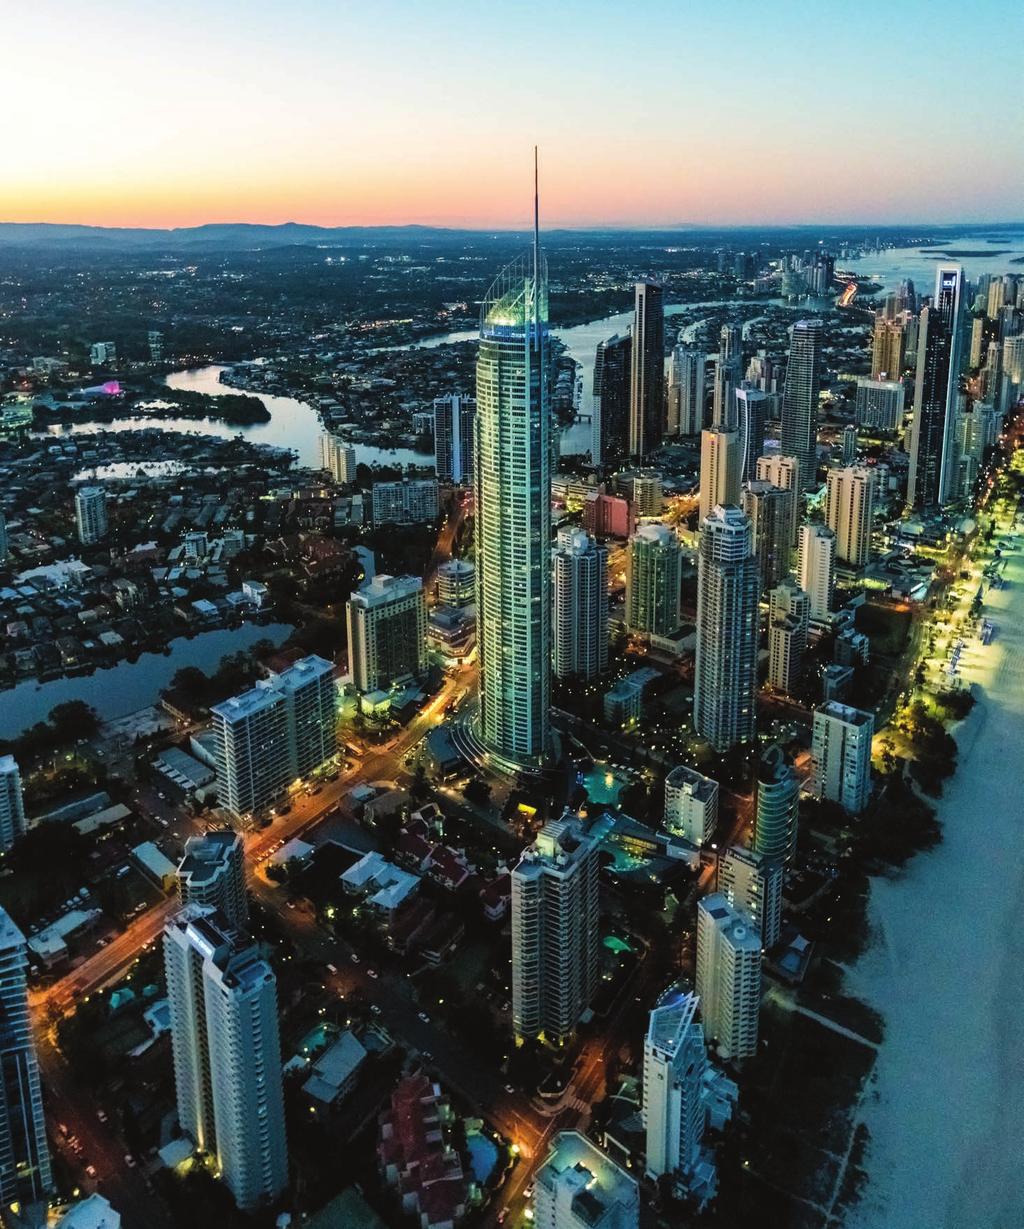 SkyPoint Observation Deck, located on Levels 77 and 78 of the iconic Q1 residential tower, is the Gold Coast s highest, most unique, conferencing and events venue.